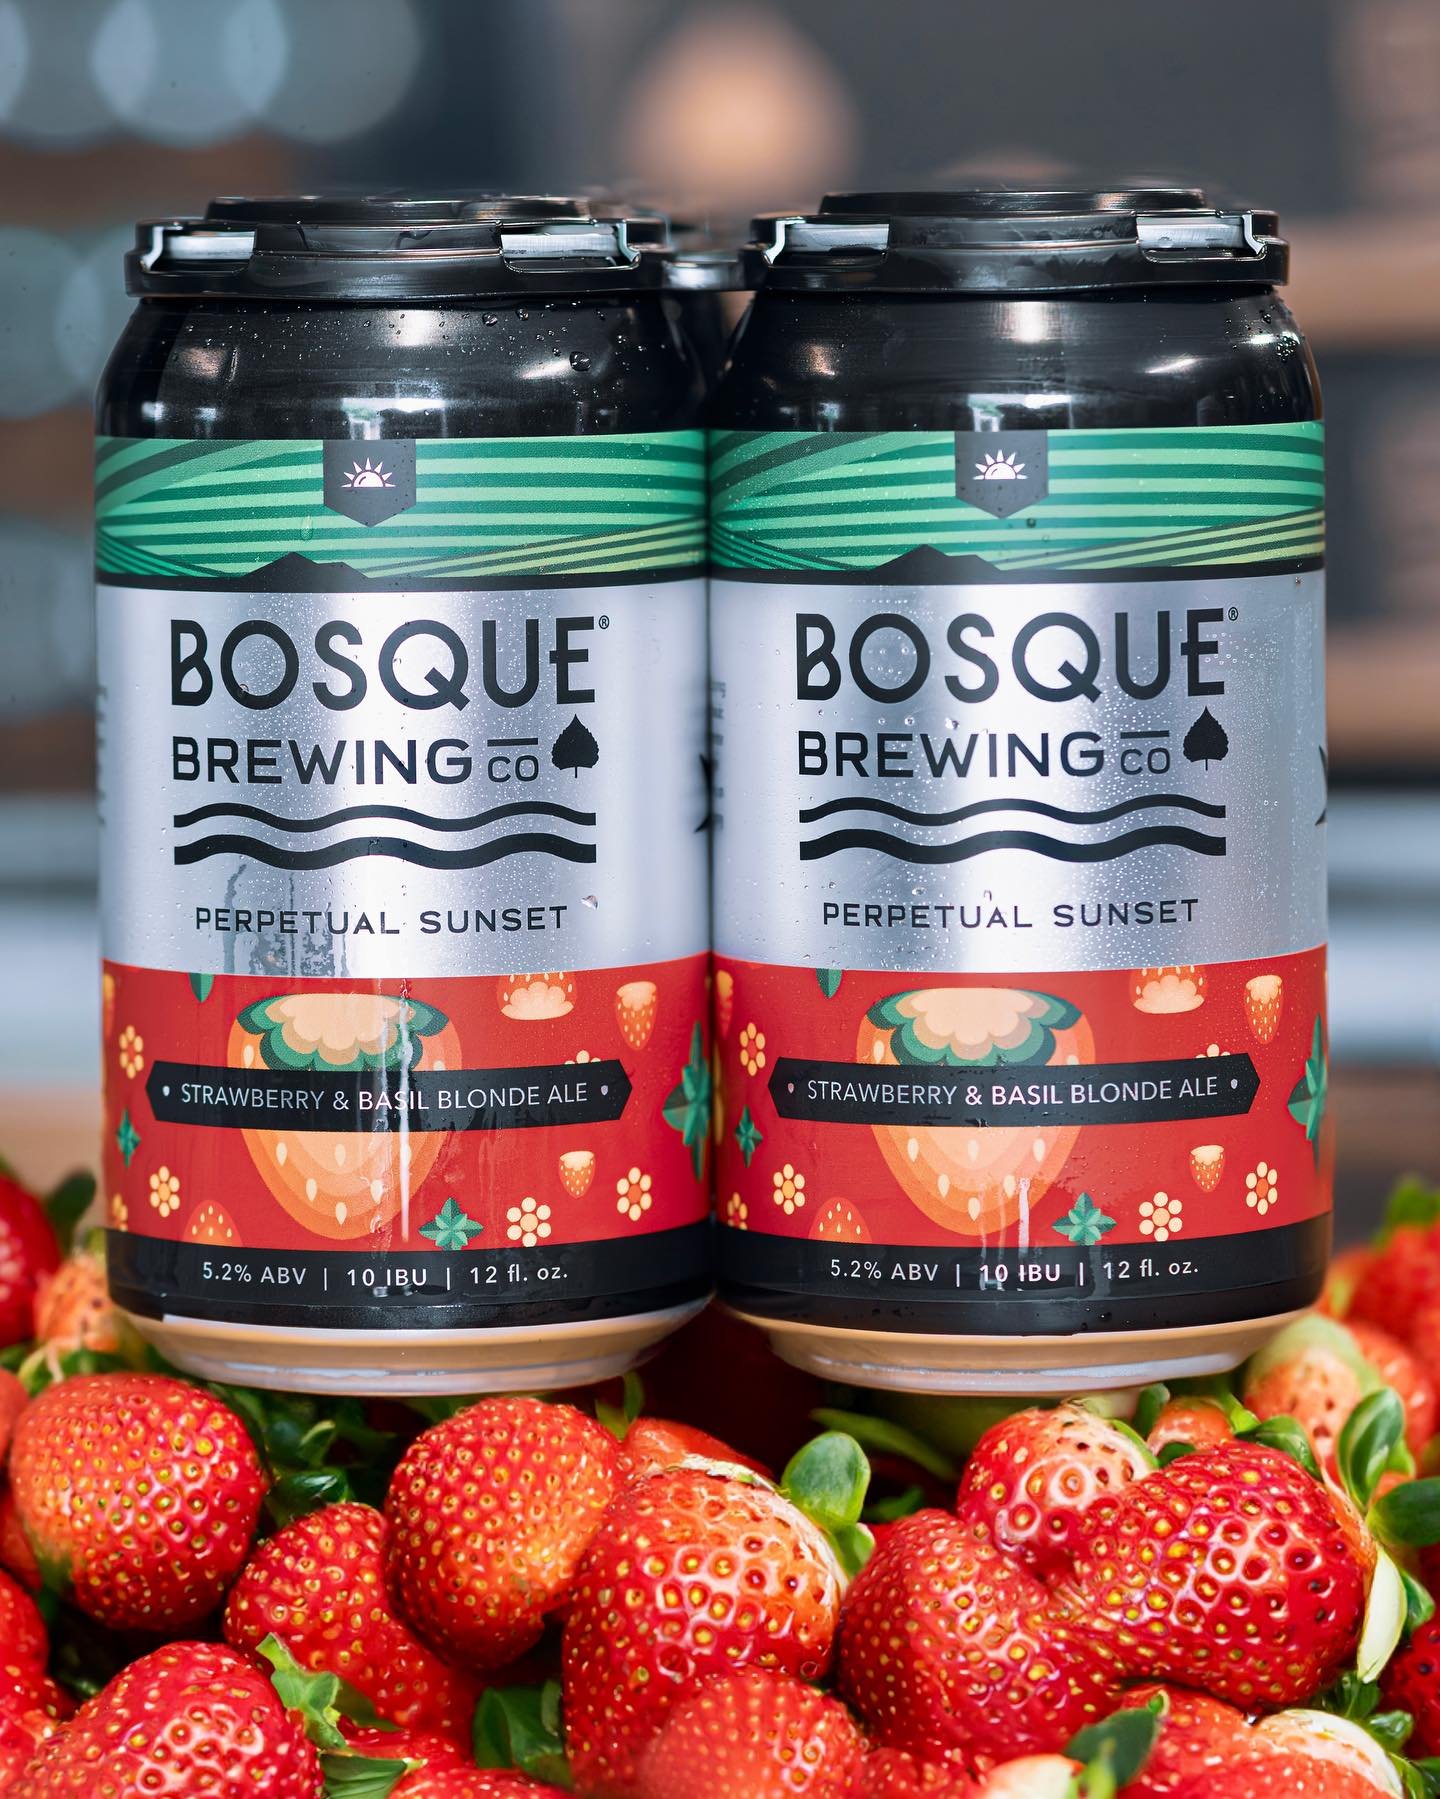 RELEASING THIS FRIDAY MAY 10TH!🚨🍓🌅

Perpetual Sunset | Strawberry &amp; Basil Blonde Ale
5.2% ABV | 10 IBU

Treat yourself this Spring with a deliciously unique spin on a classic blonde ale. Strawberry is front and center, while basil provides a p